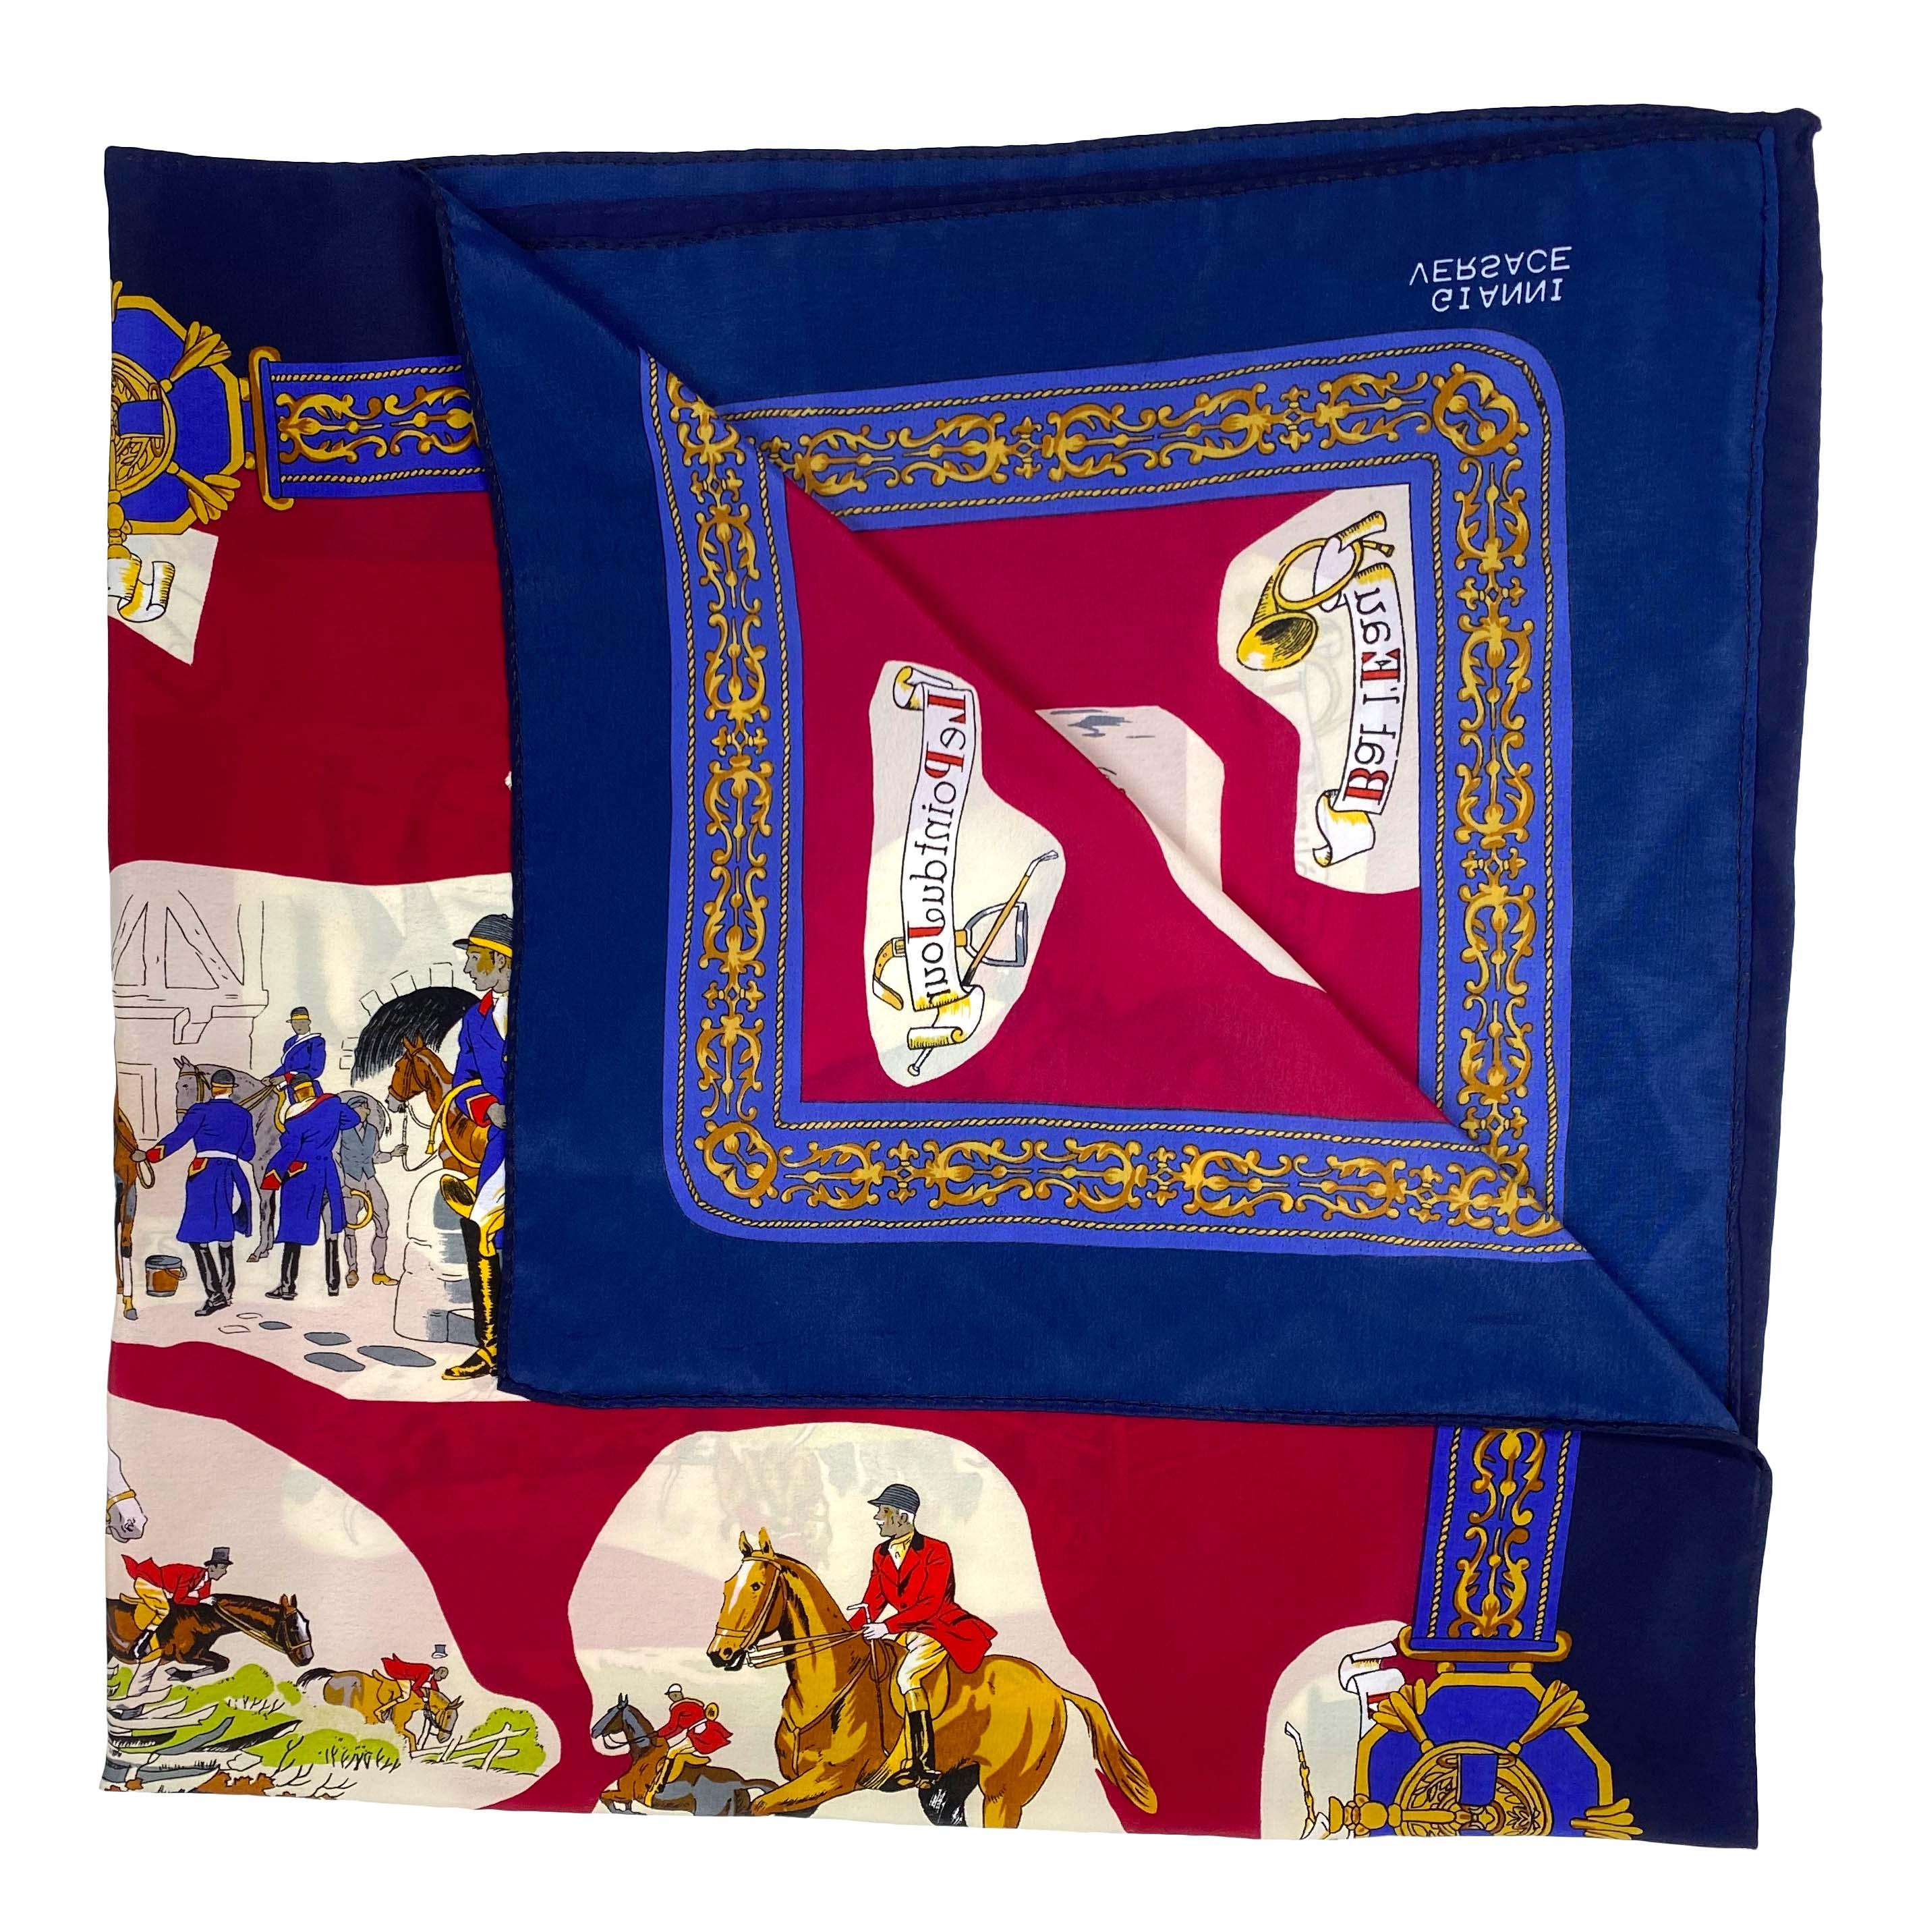 Presenting a hunting motif Gianni Versace scarf, designed by Gianni Versace. This scarf features deep reds and blues with vintage french hunting scenes. The perfect addition to any outfit or bag, this unique scarf is truly a work of art.